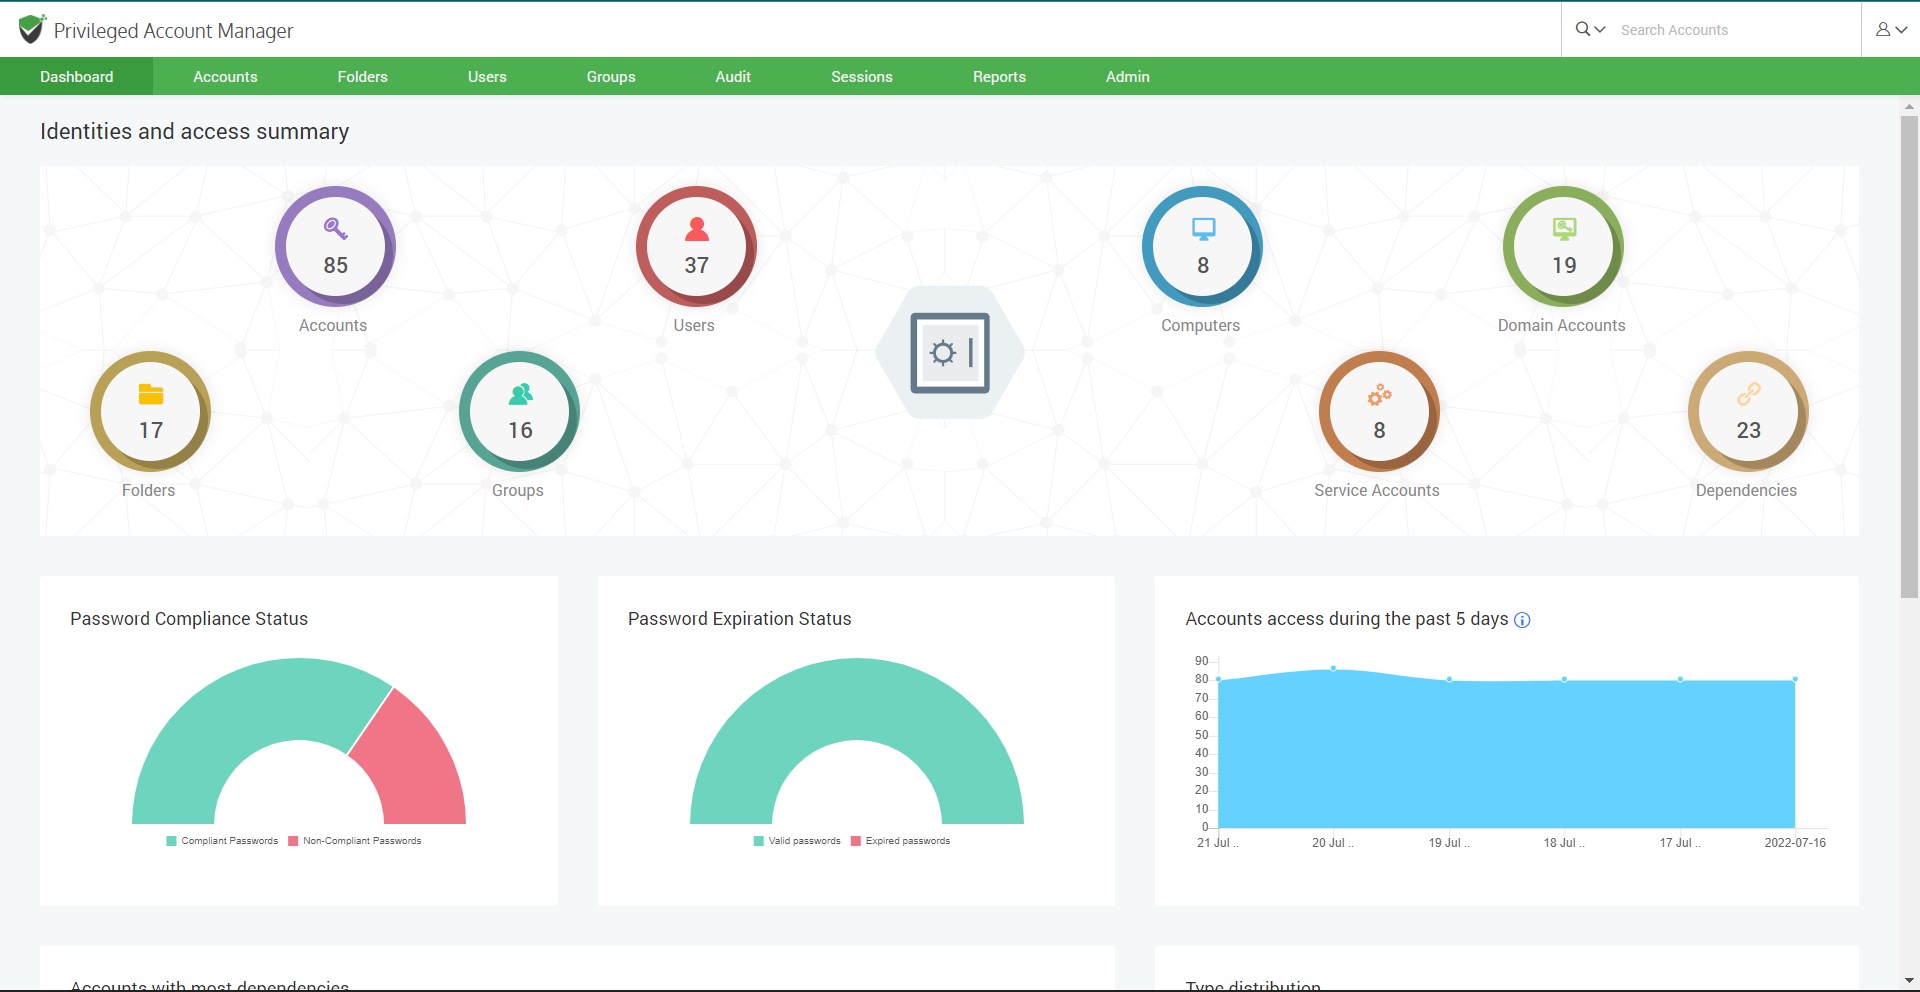 Privileged Account Manager dashboard